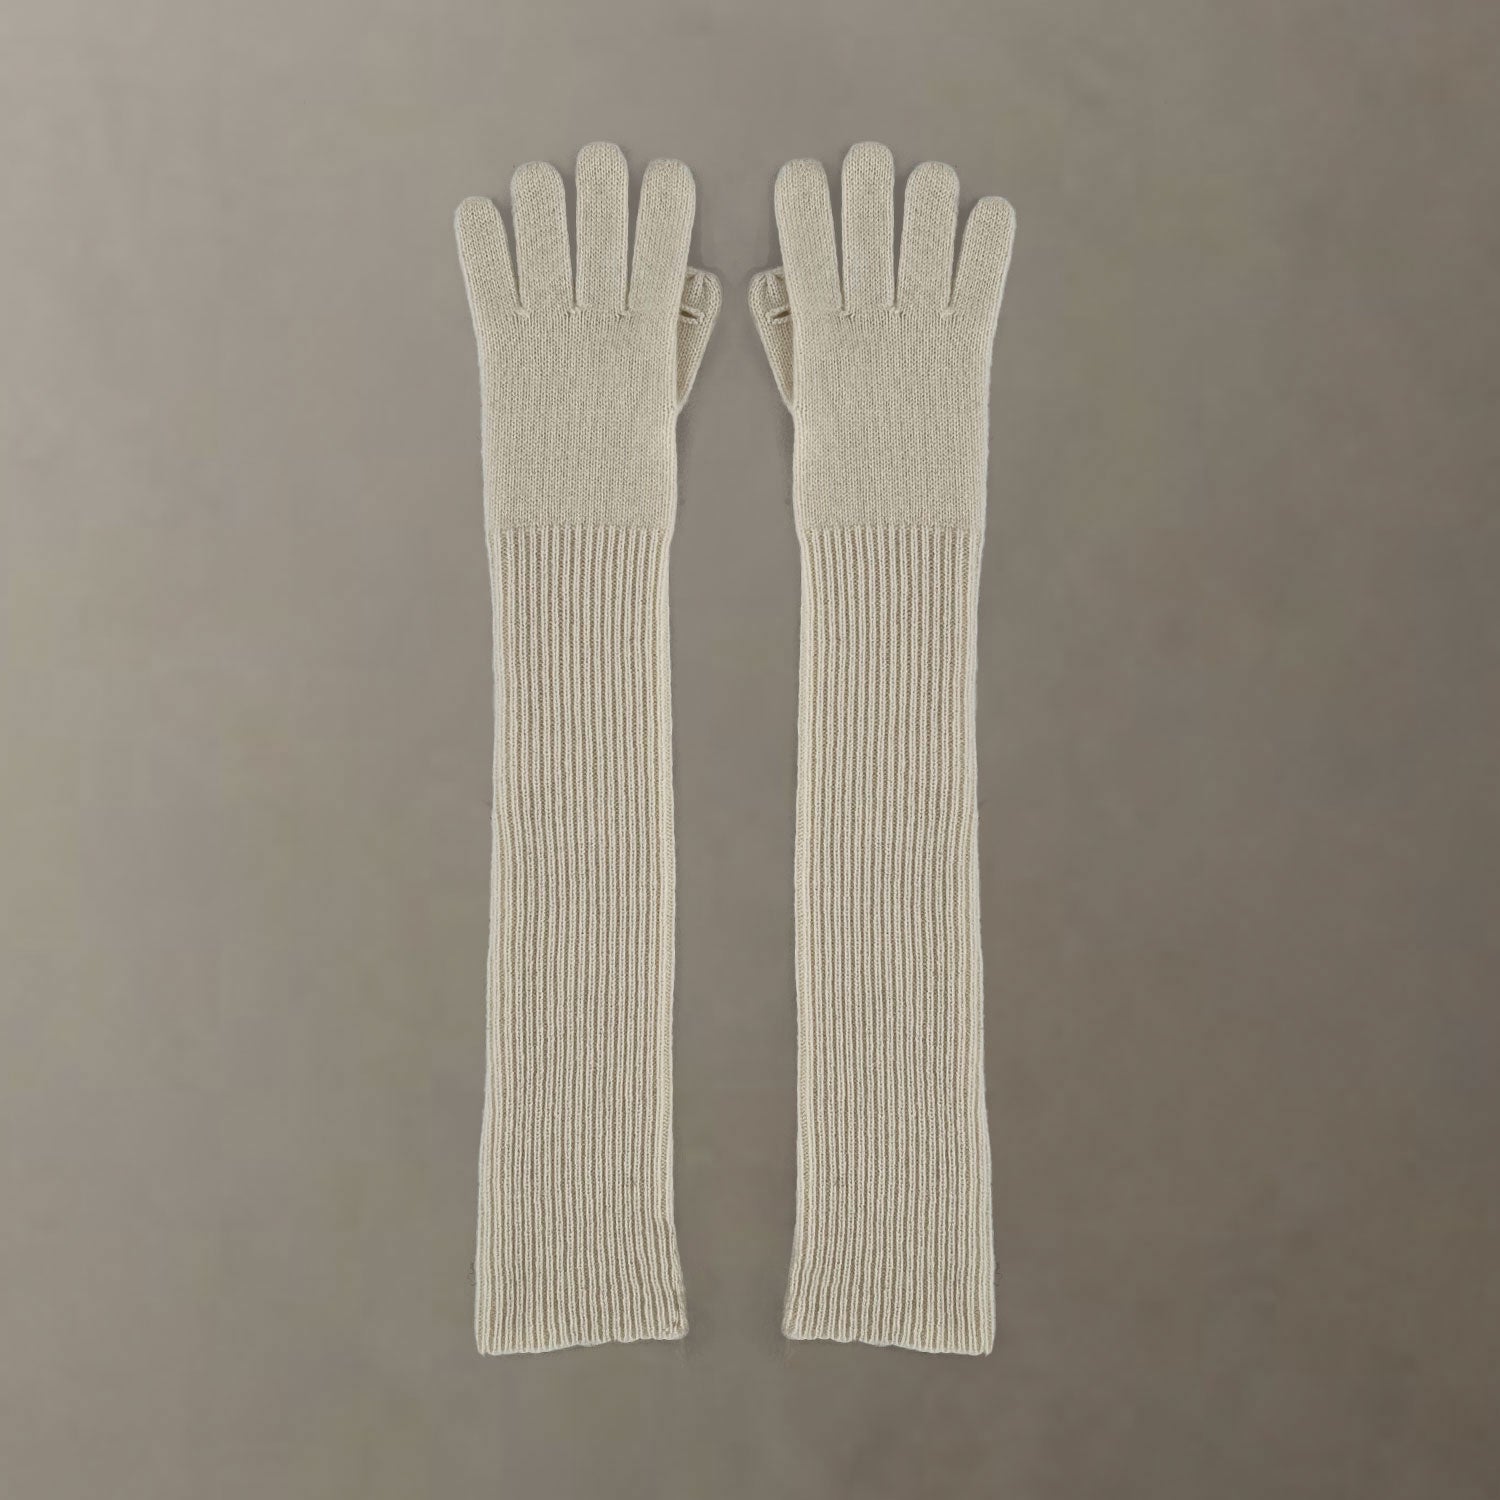 Cashmere Writing Gloves Product Review - NeededInTheHome